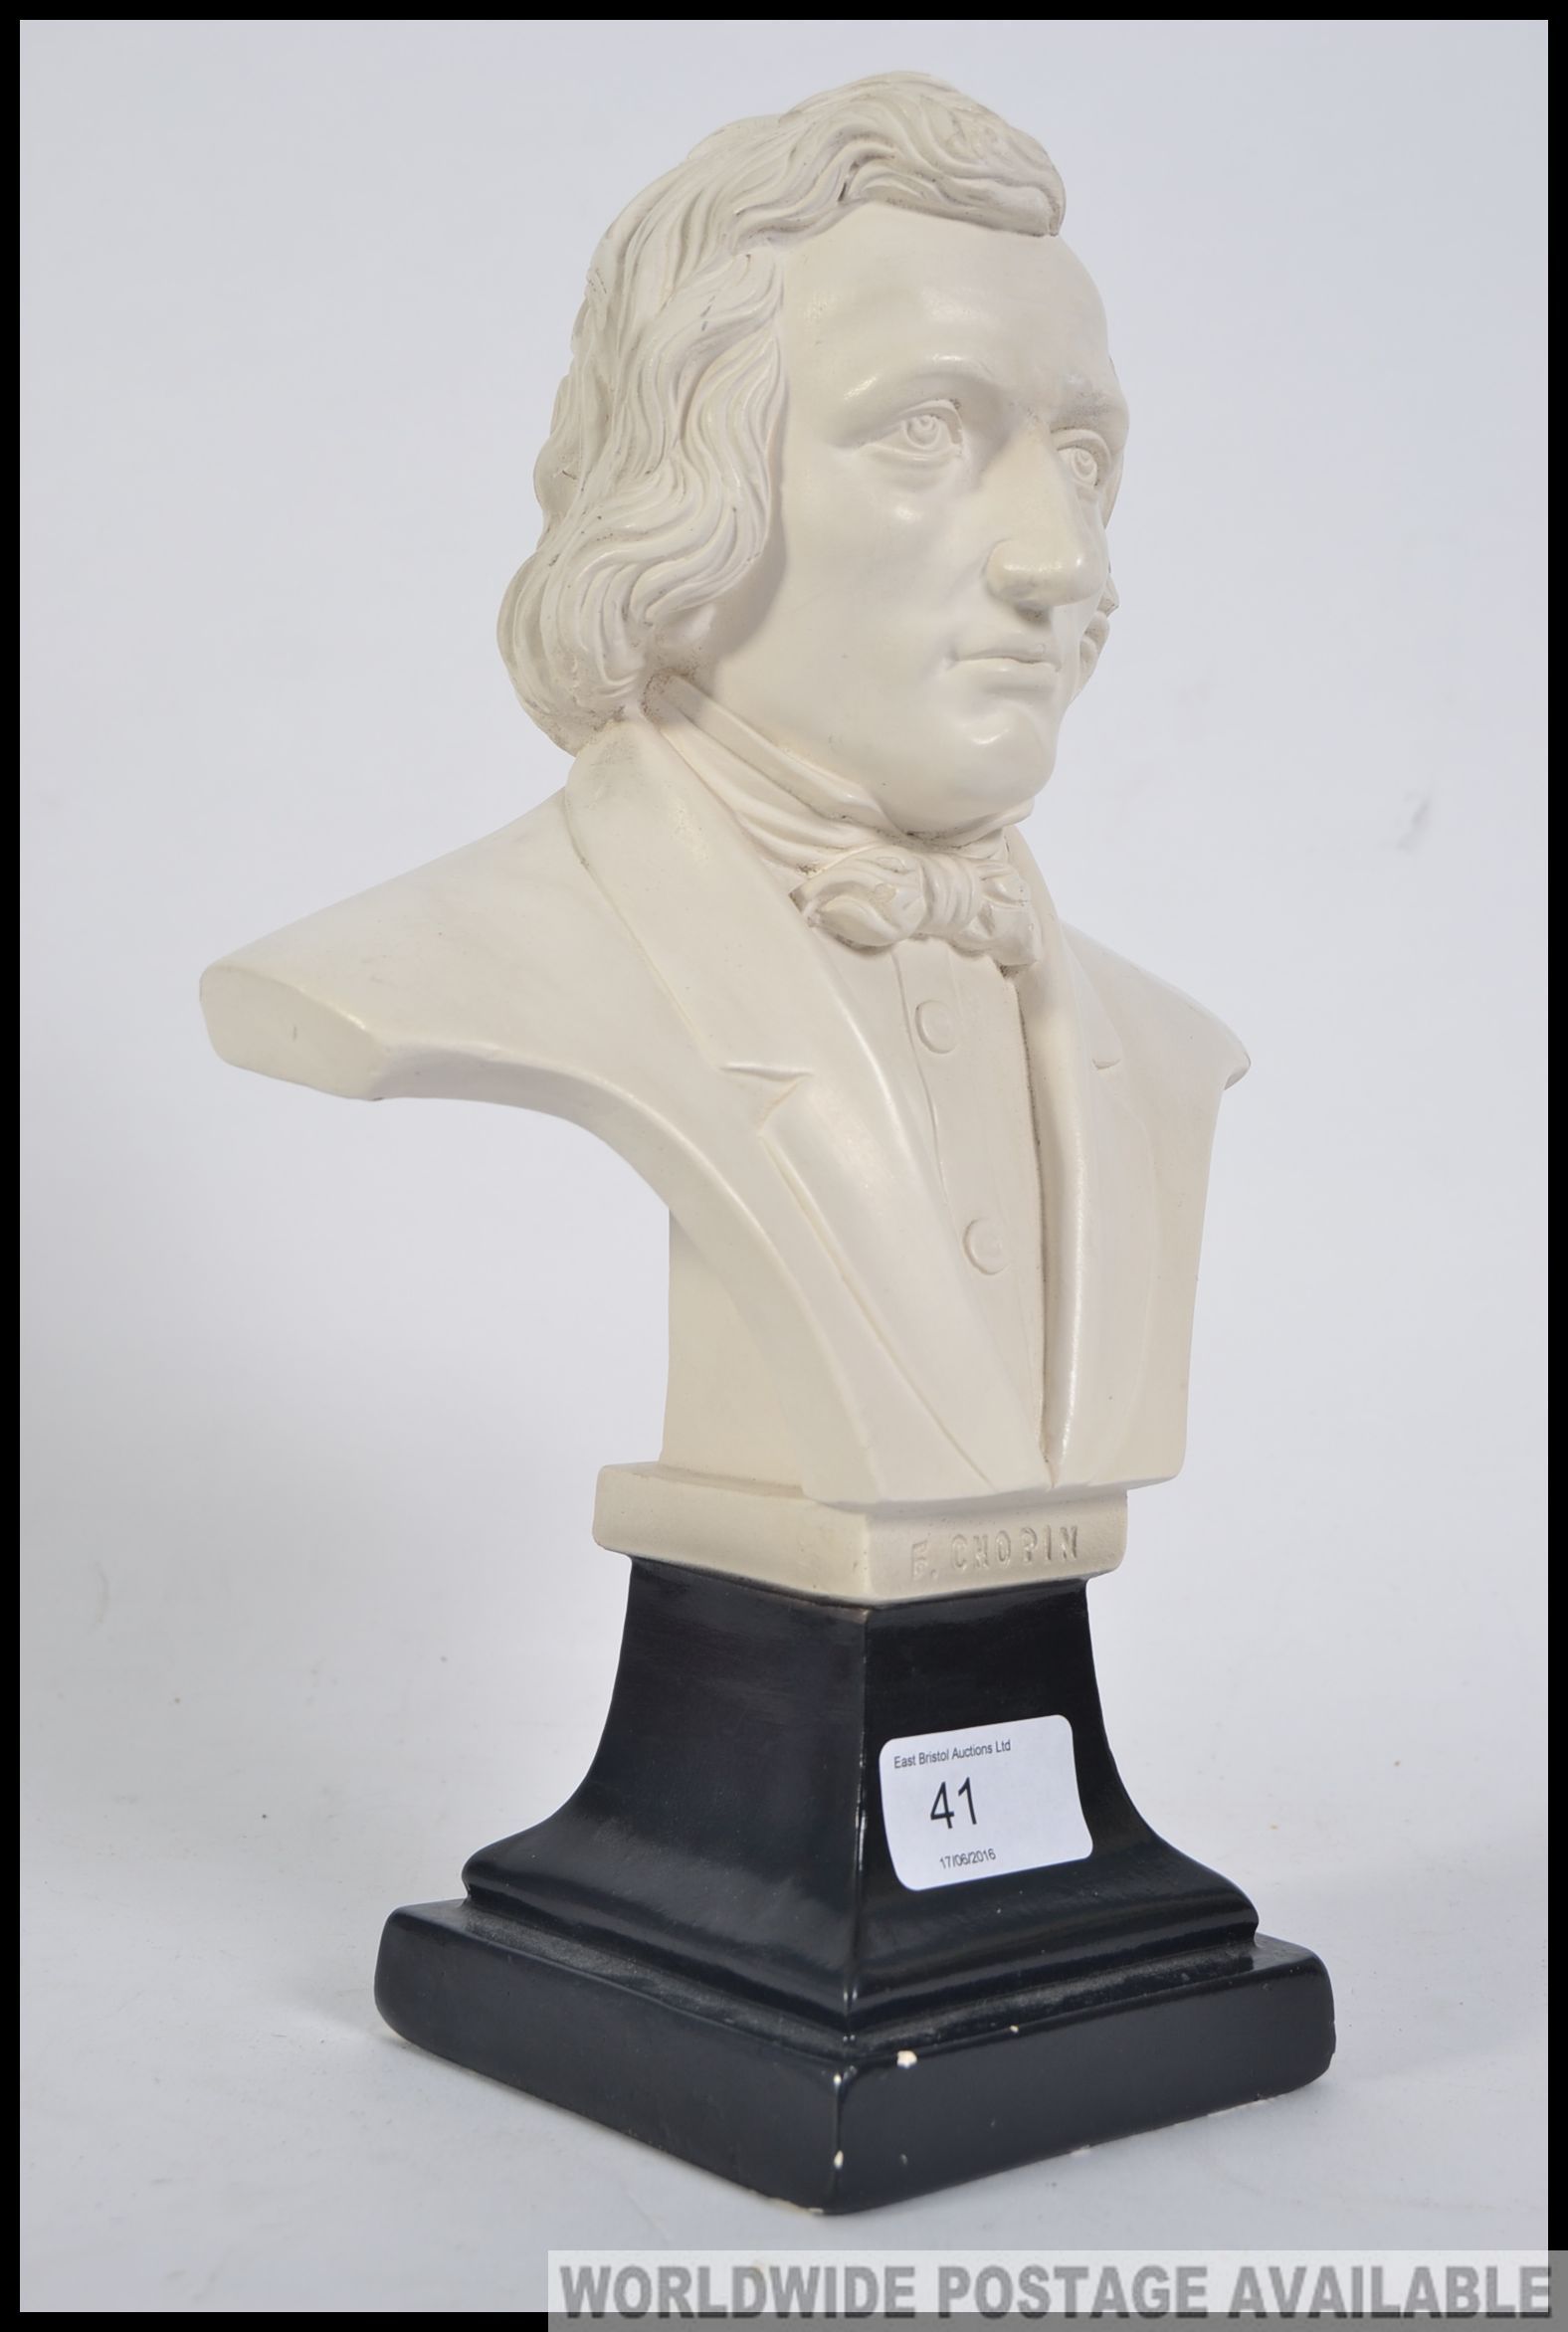 A 20th century plaster bust of Chopin being raised on a socle plinth base with notation.